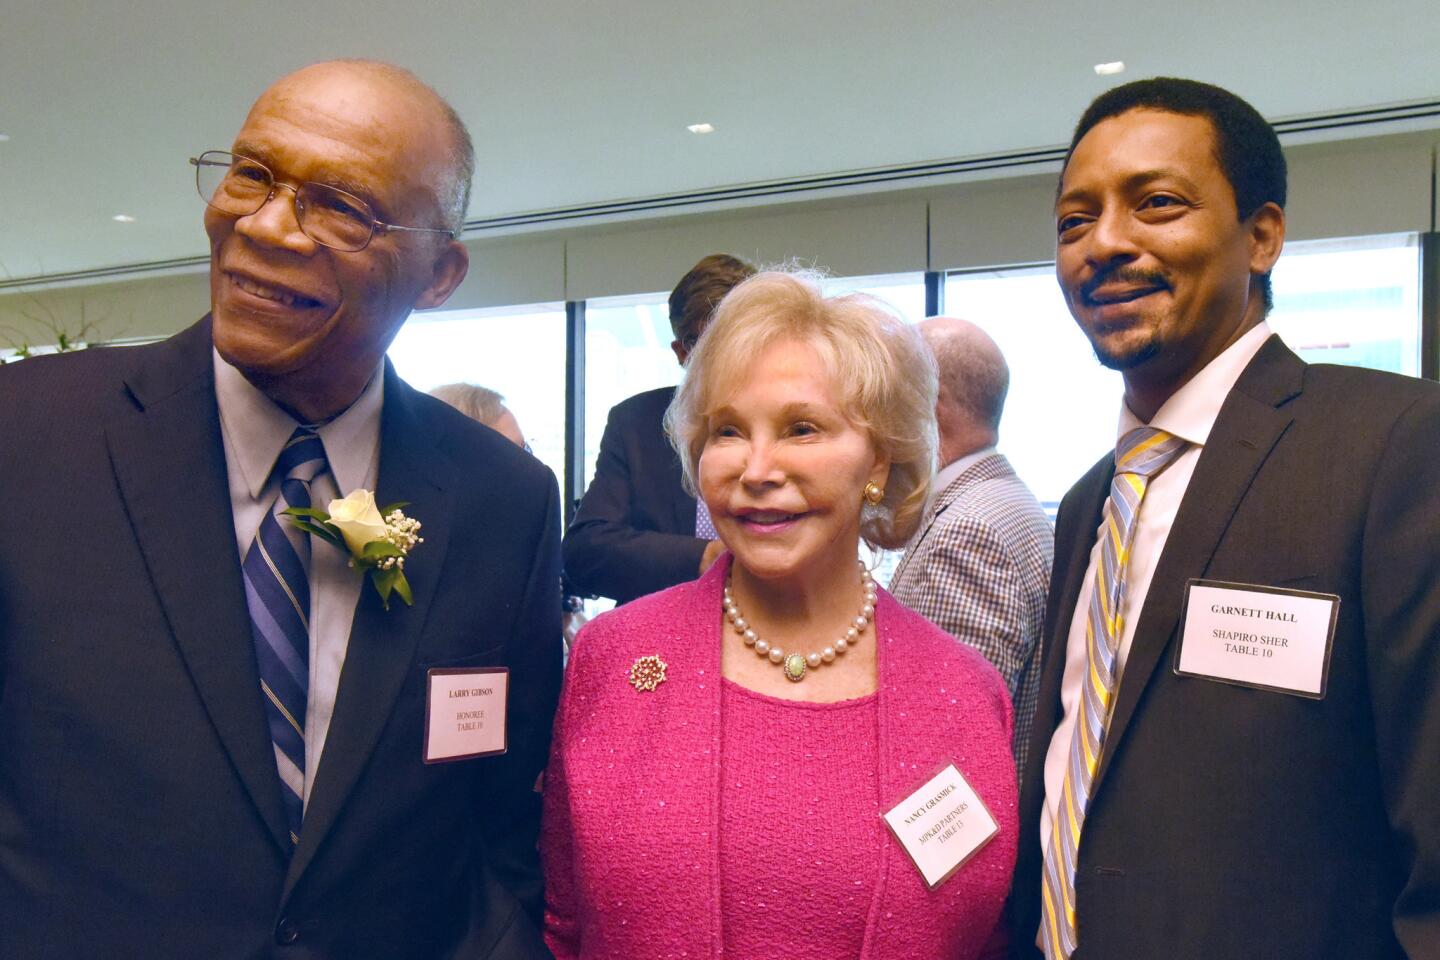 Larry Gibson, Nancy Grasmick and Garnett Hall at the Baltimore Sun Hall of Fame party at the Center Club.